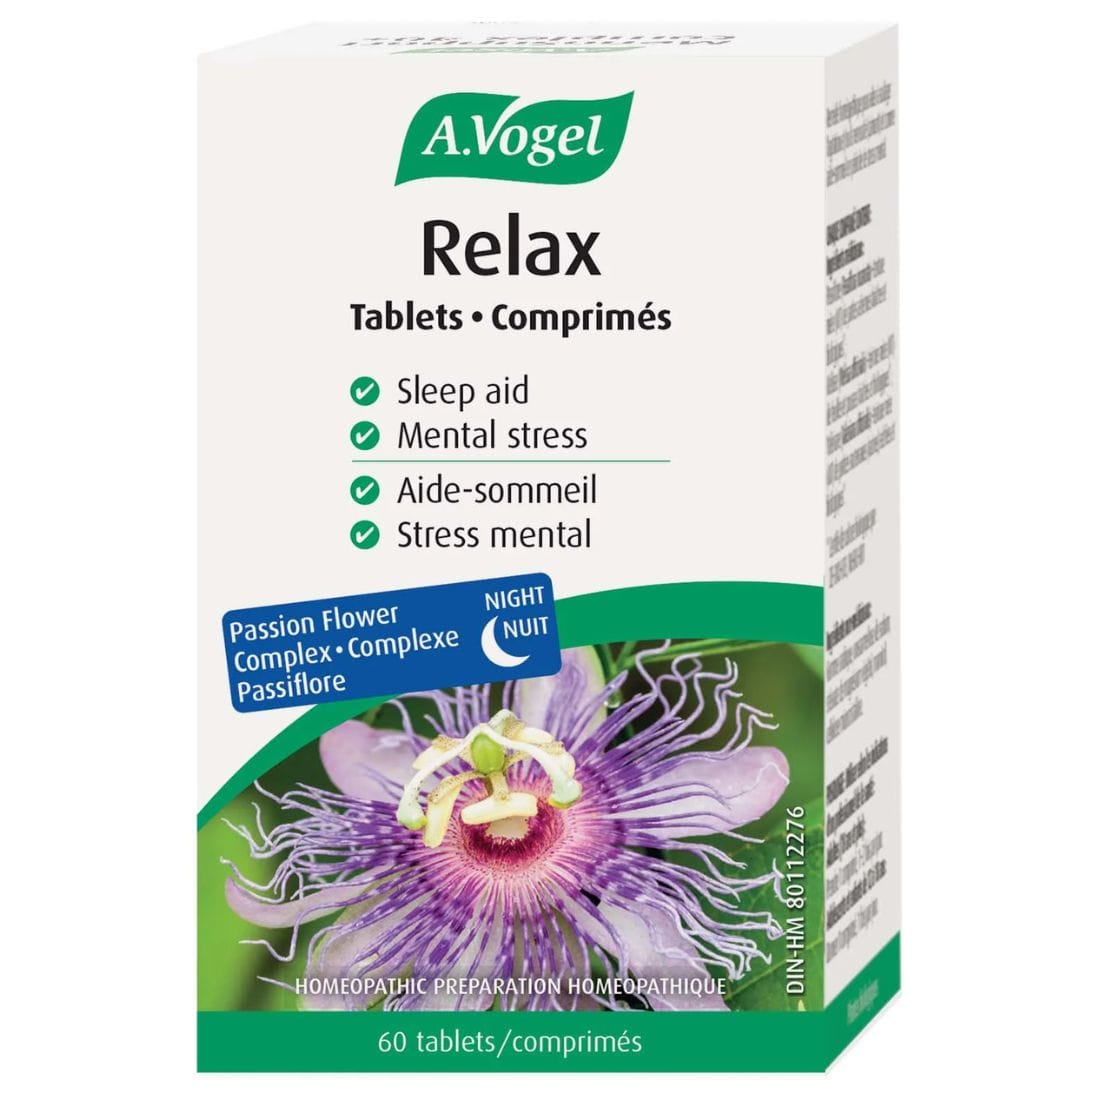 A. Vogel Relax Tabs, Sleep Aid and Mental Stress Relief